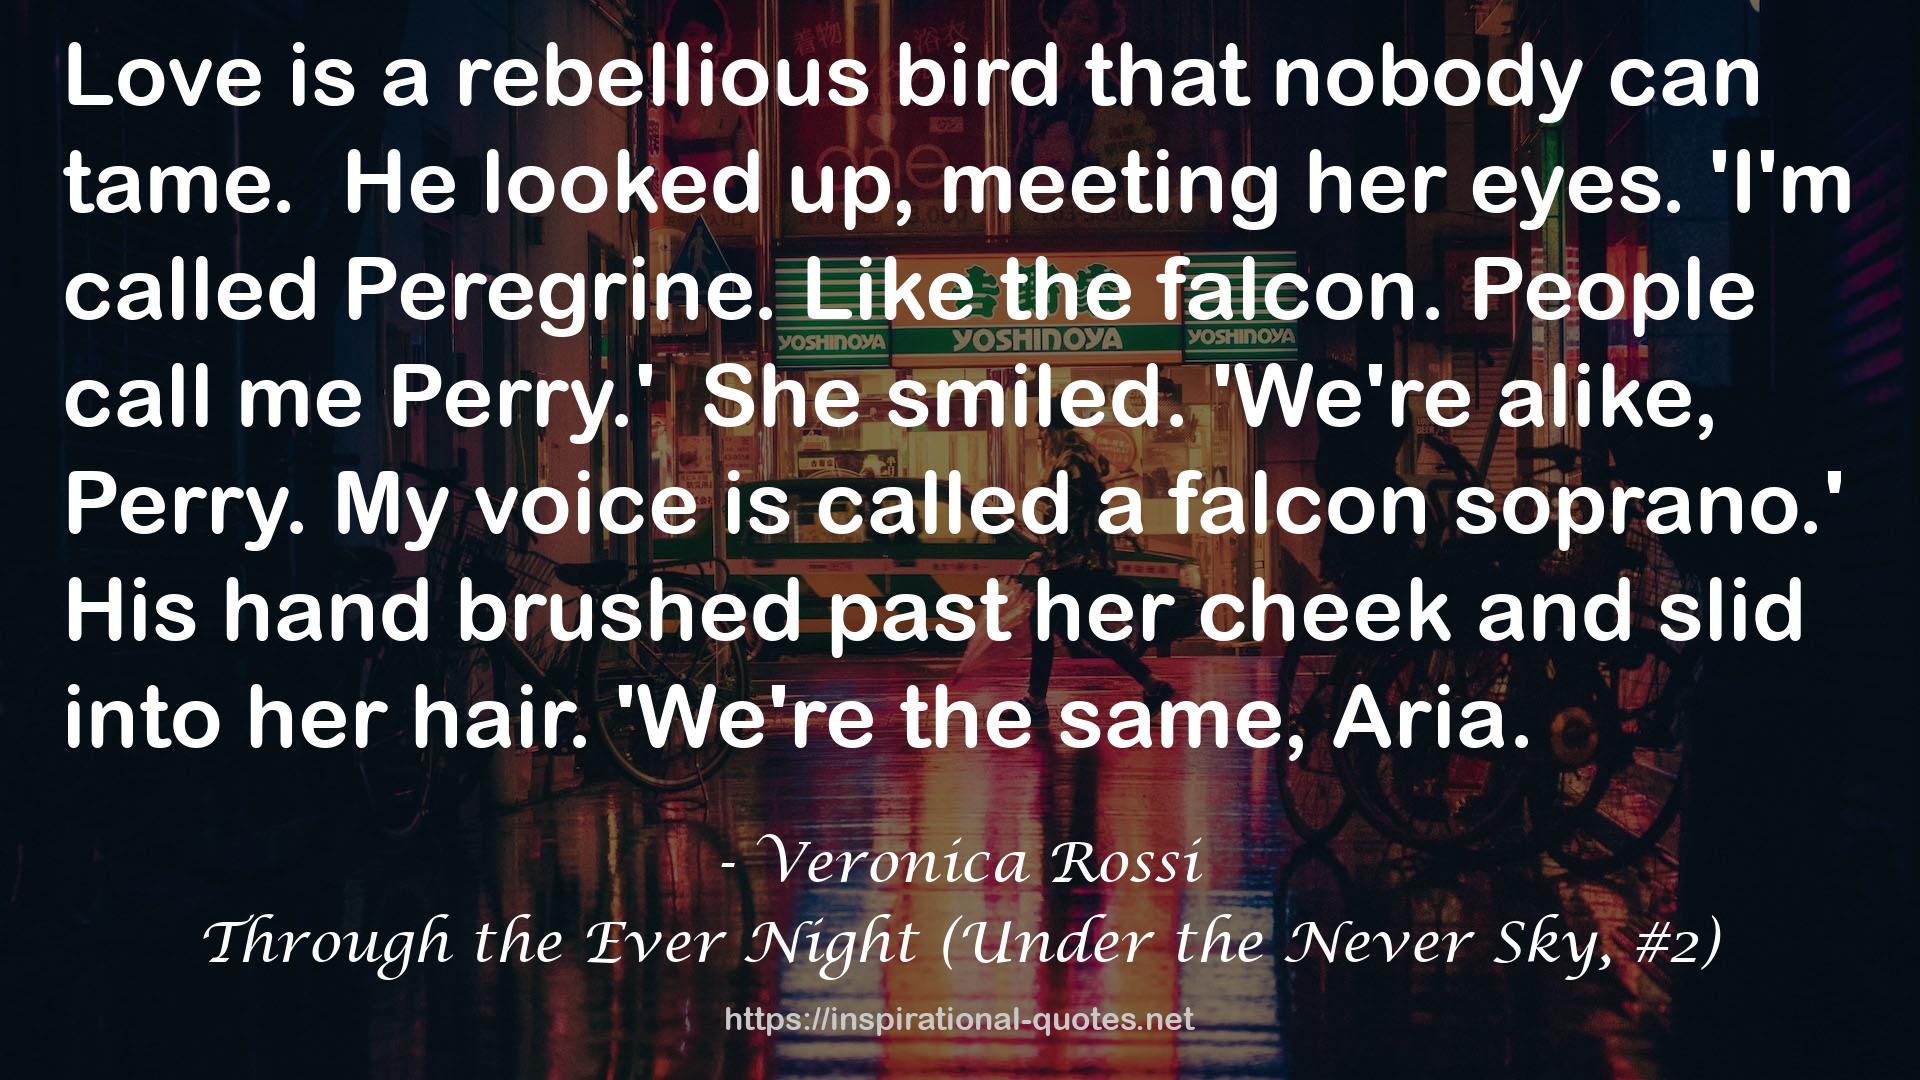 Through the Ever Night (Under the Never Sky, #2) QUOTES